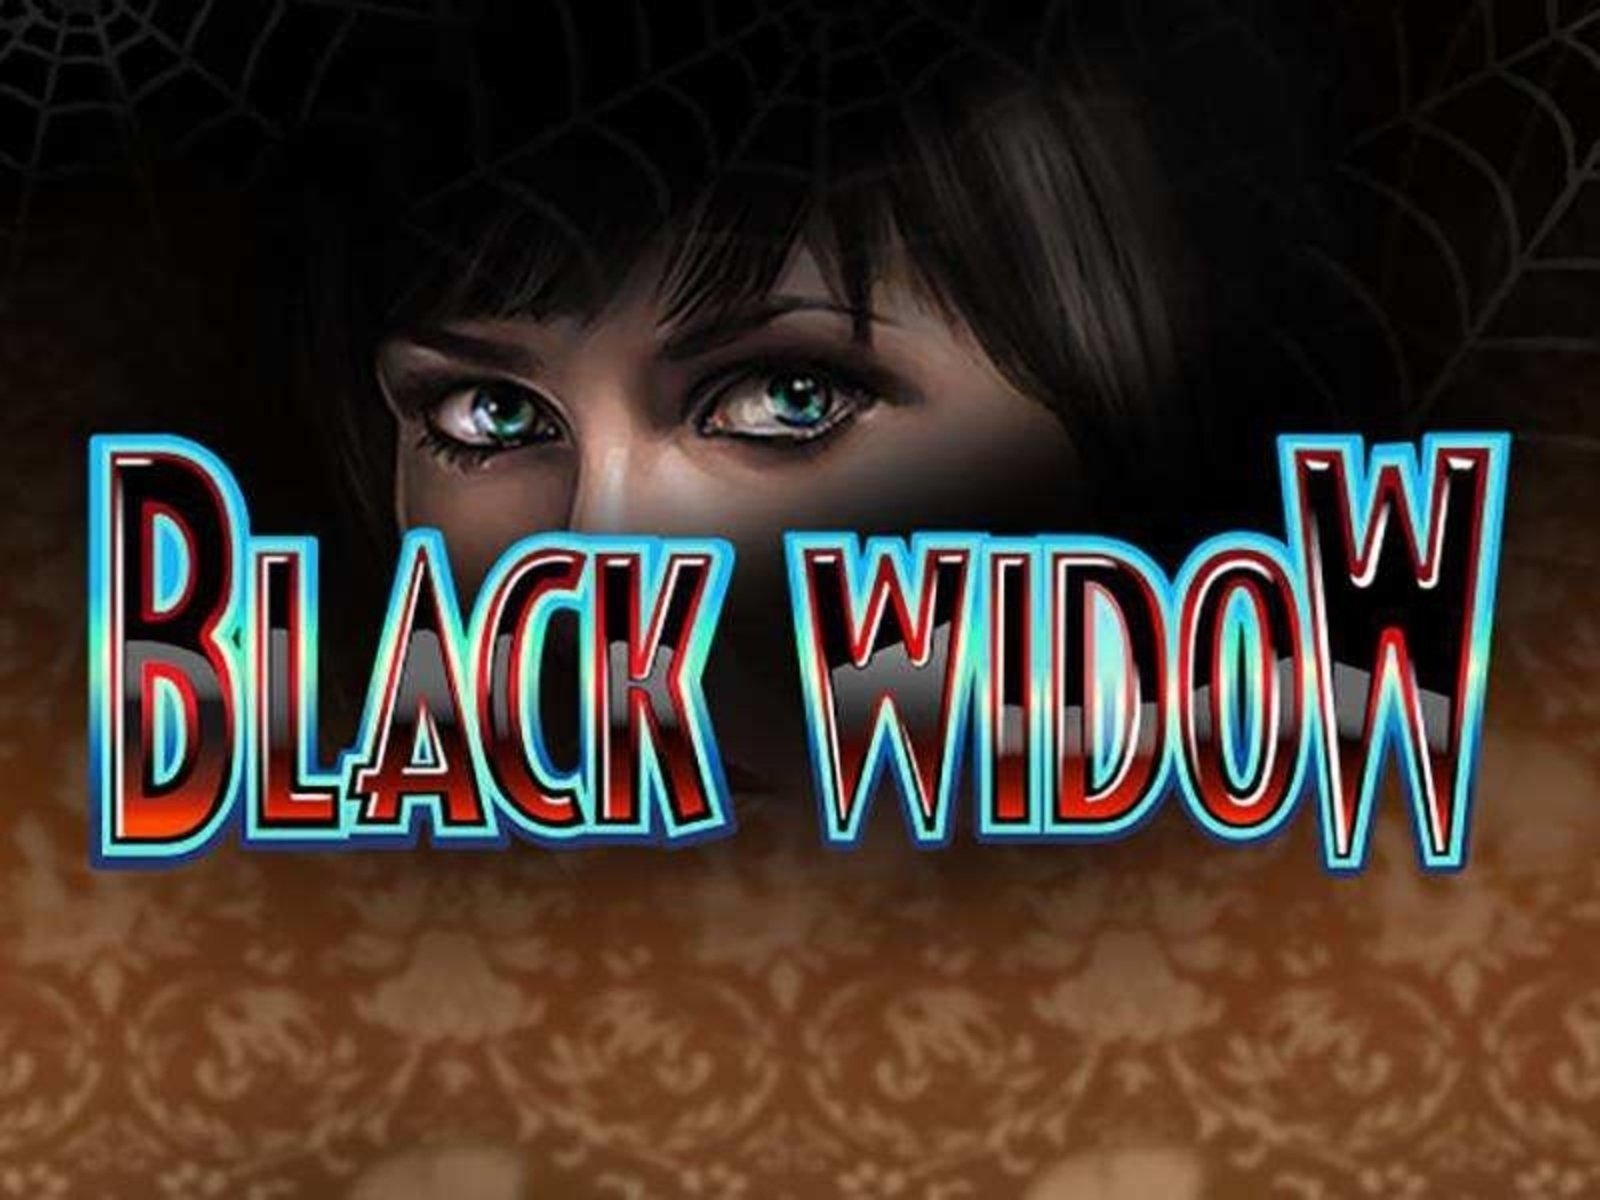 The Black Widow Online Slot Demo Game by IGT